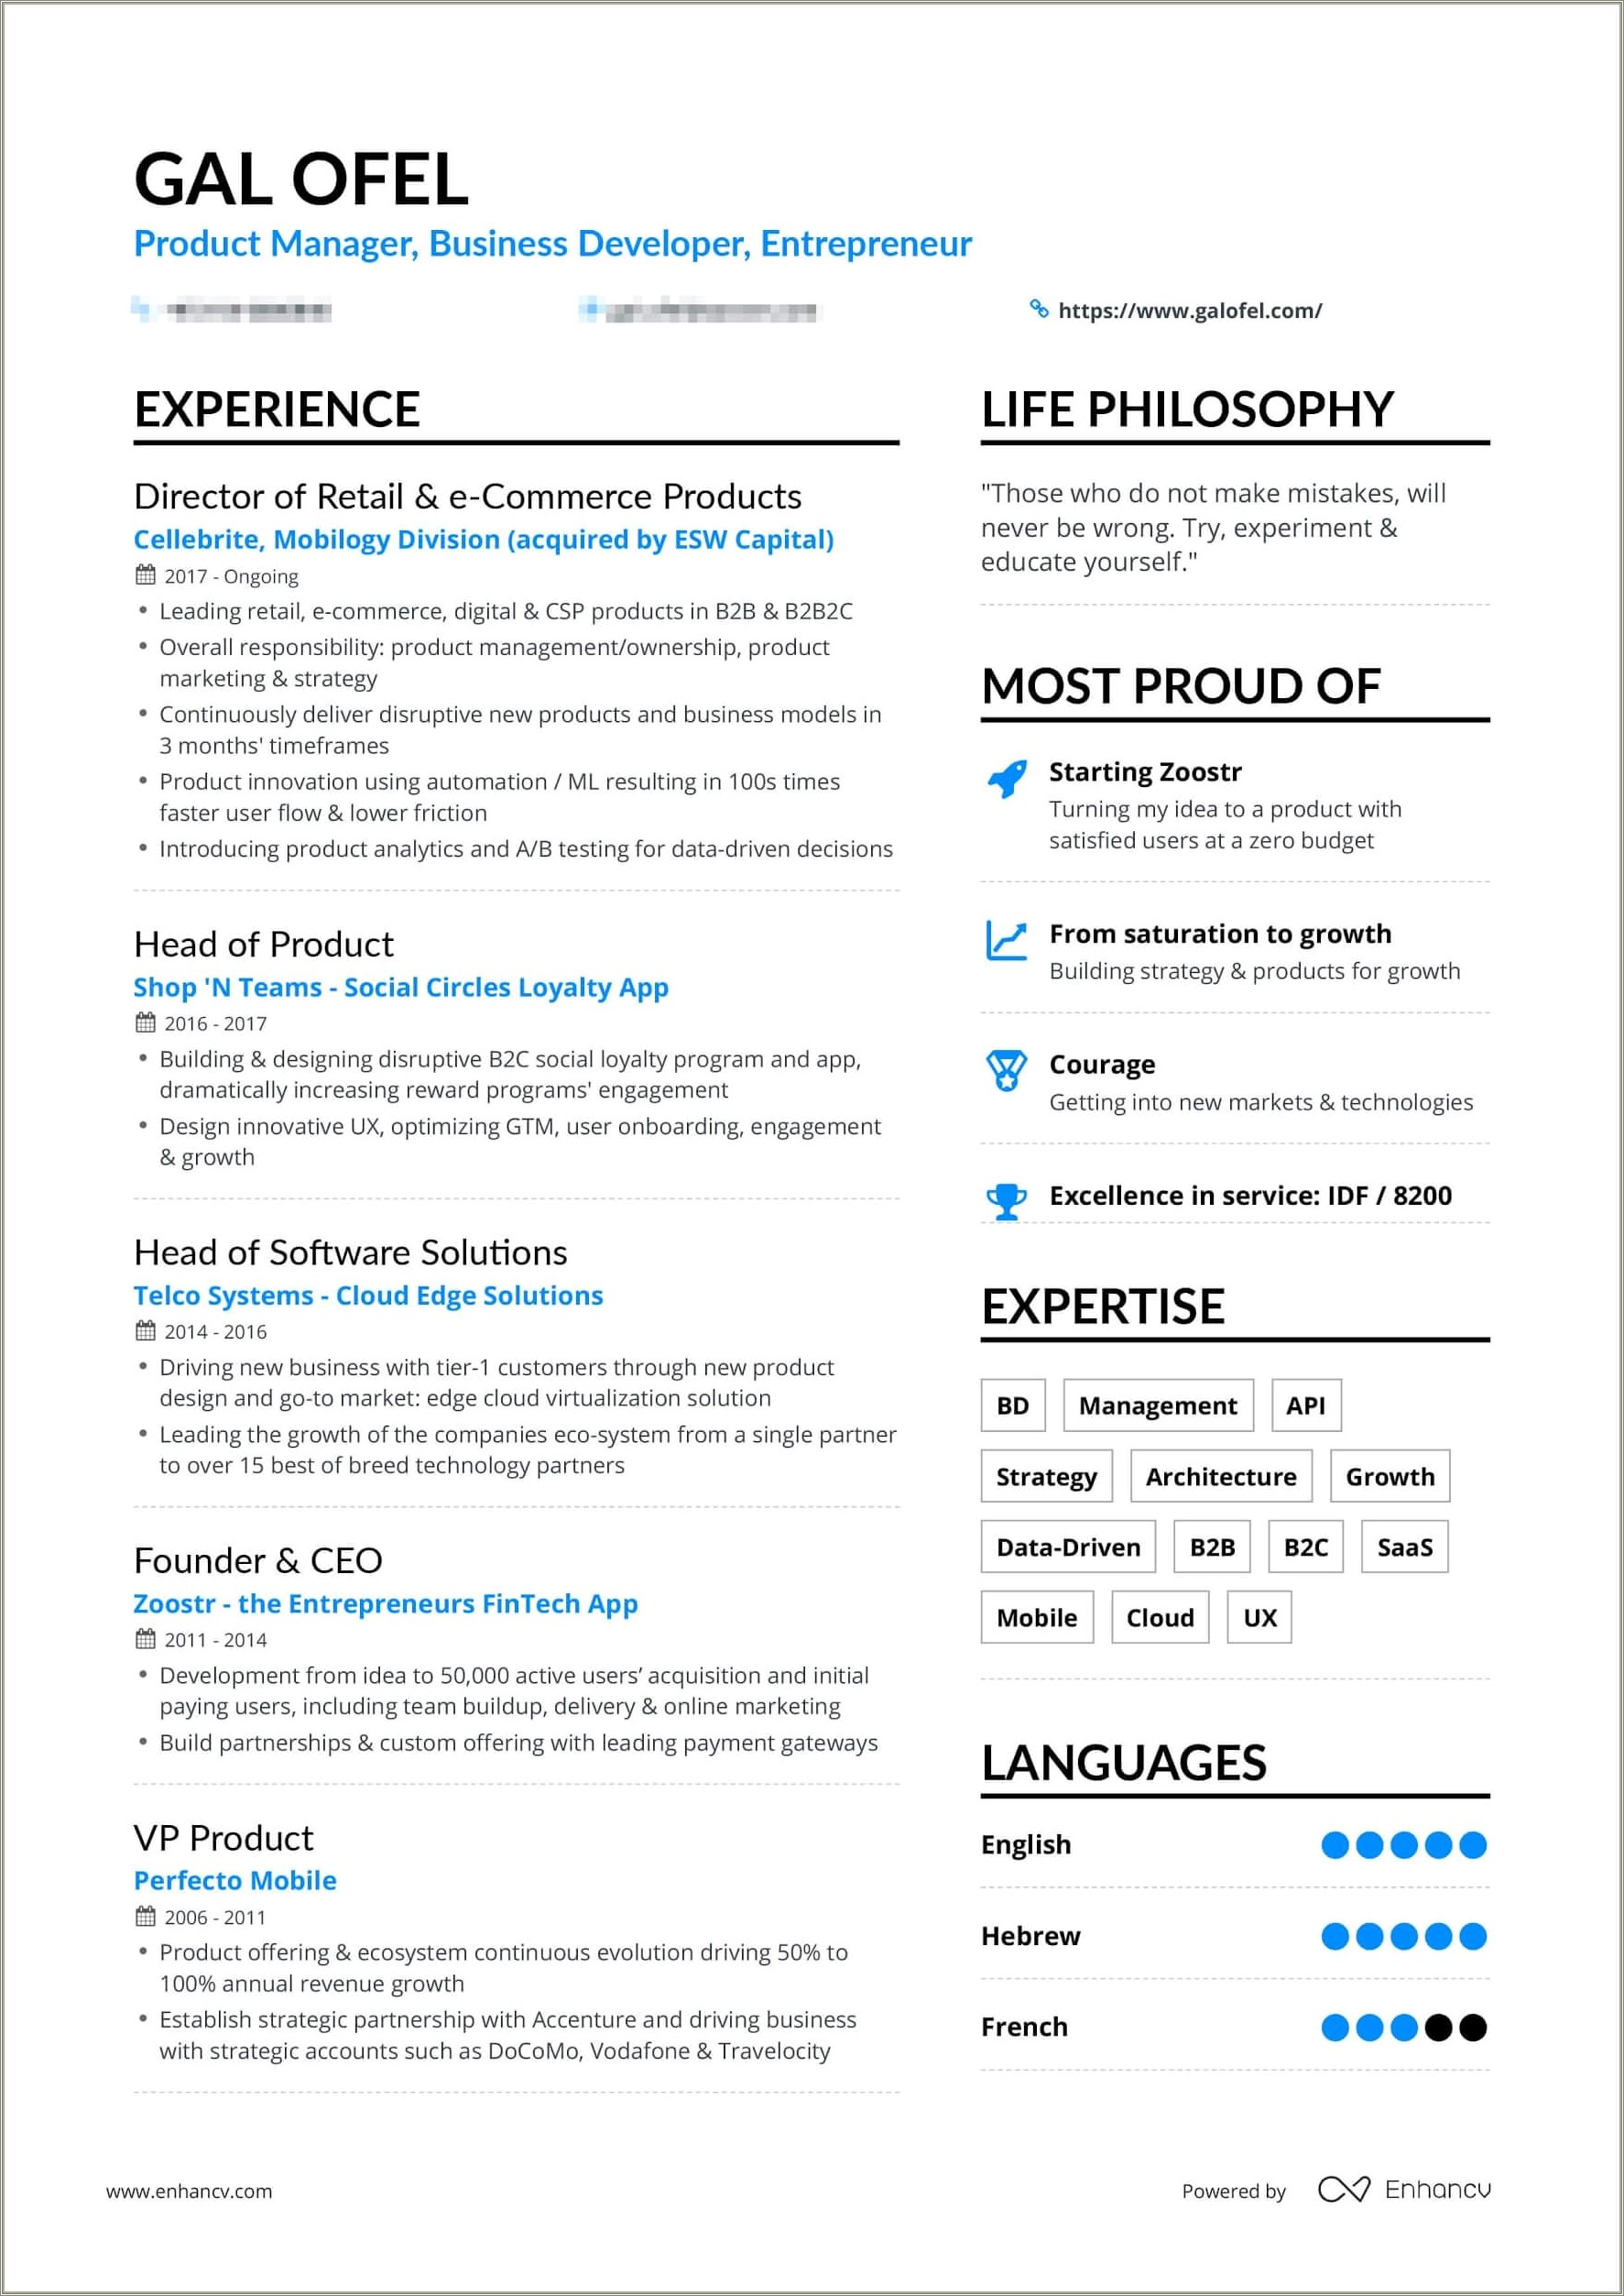 Jobs A Resume Is Not Needed